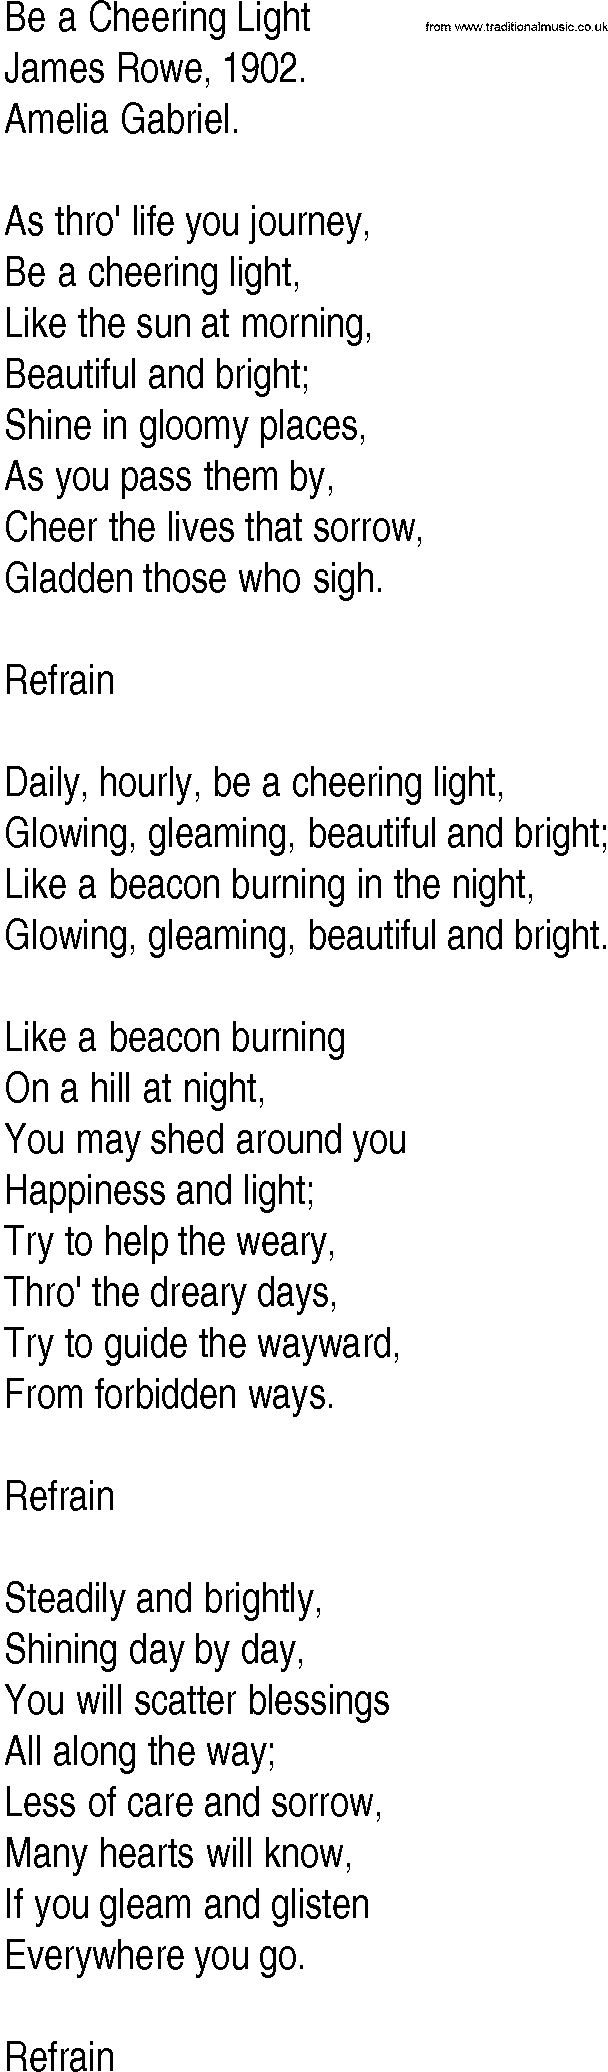 Hymn and Gospel Song: Be a Cheering Light by James Rowe lyrics